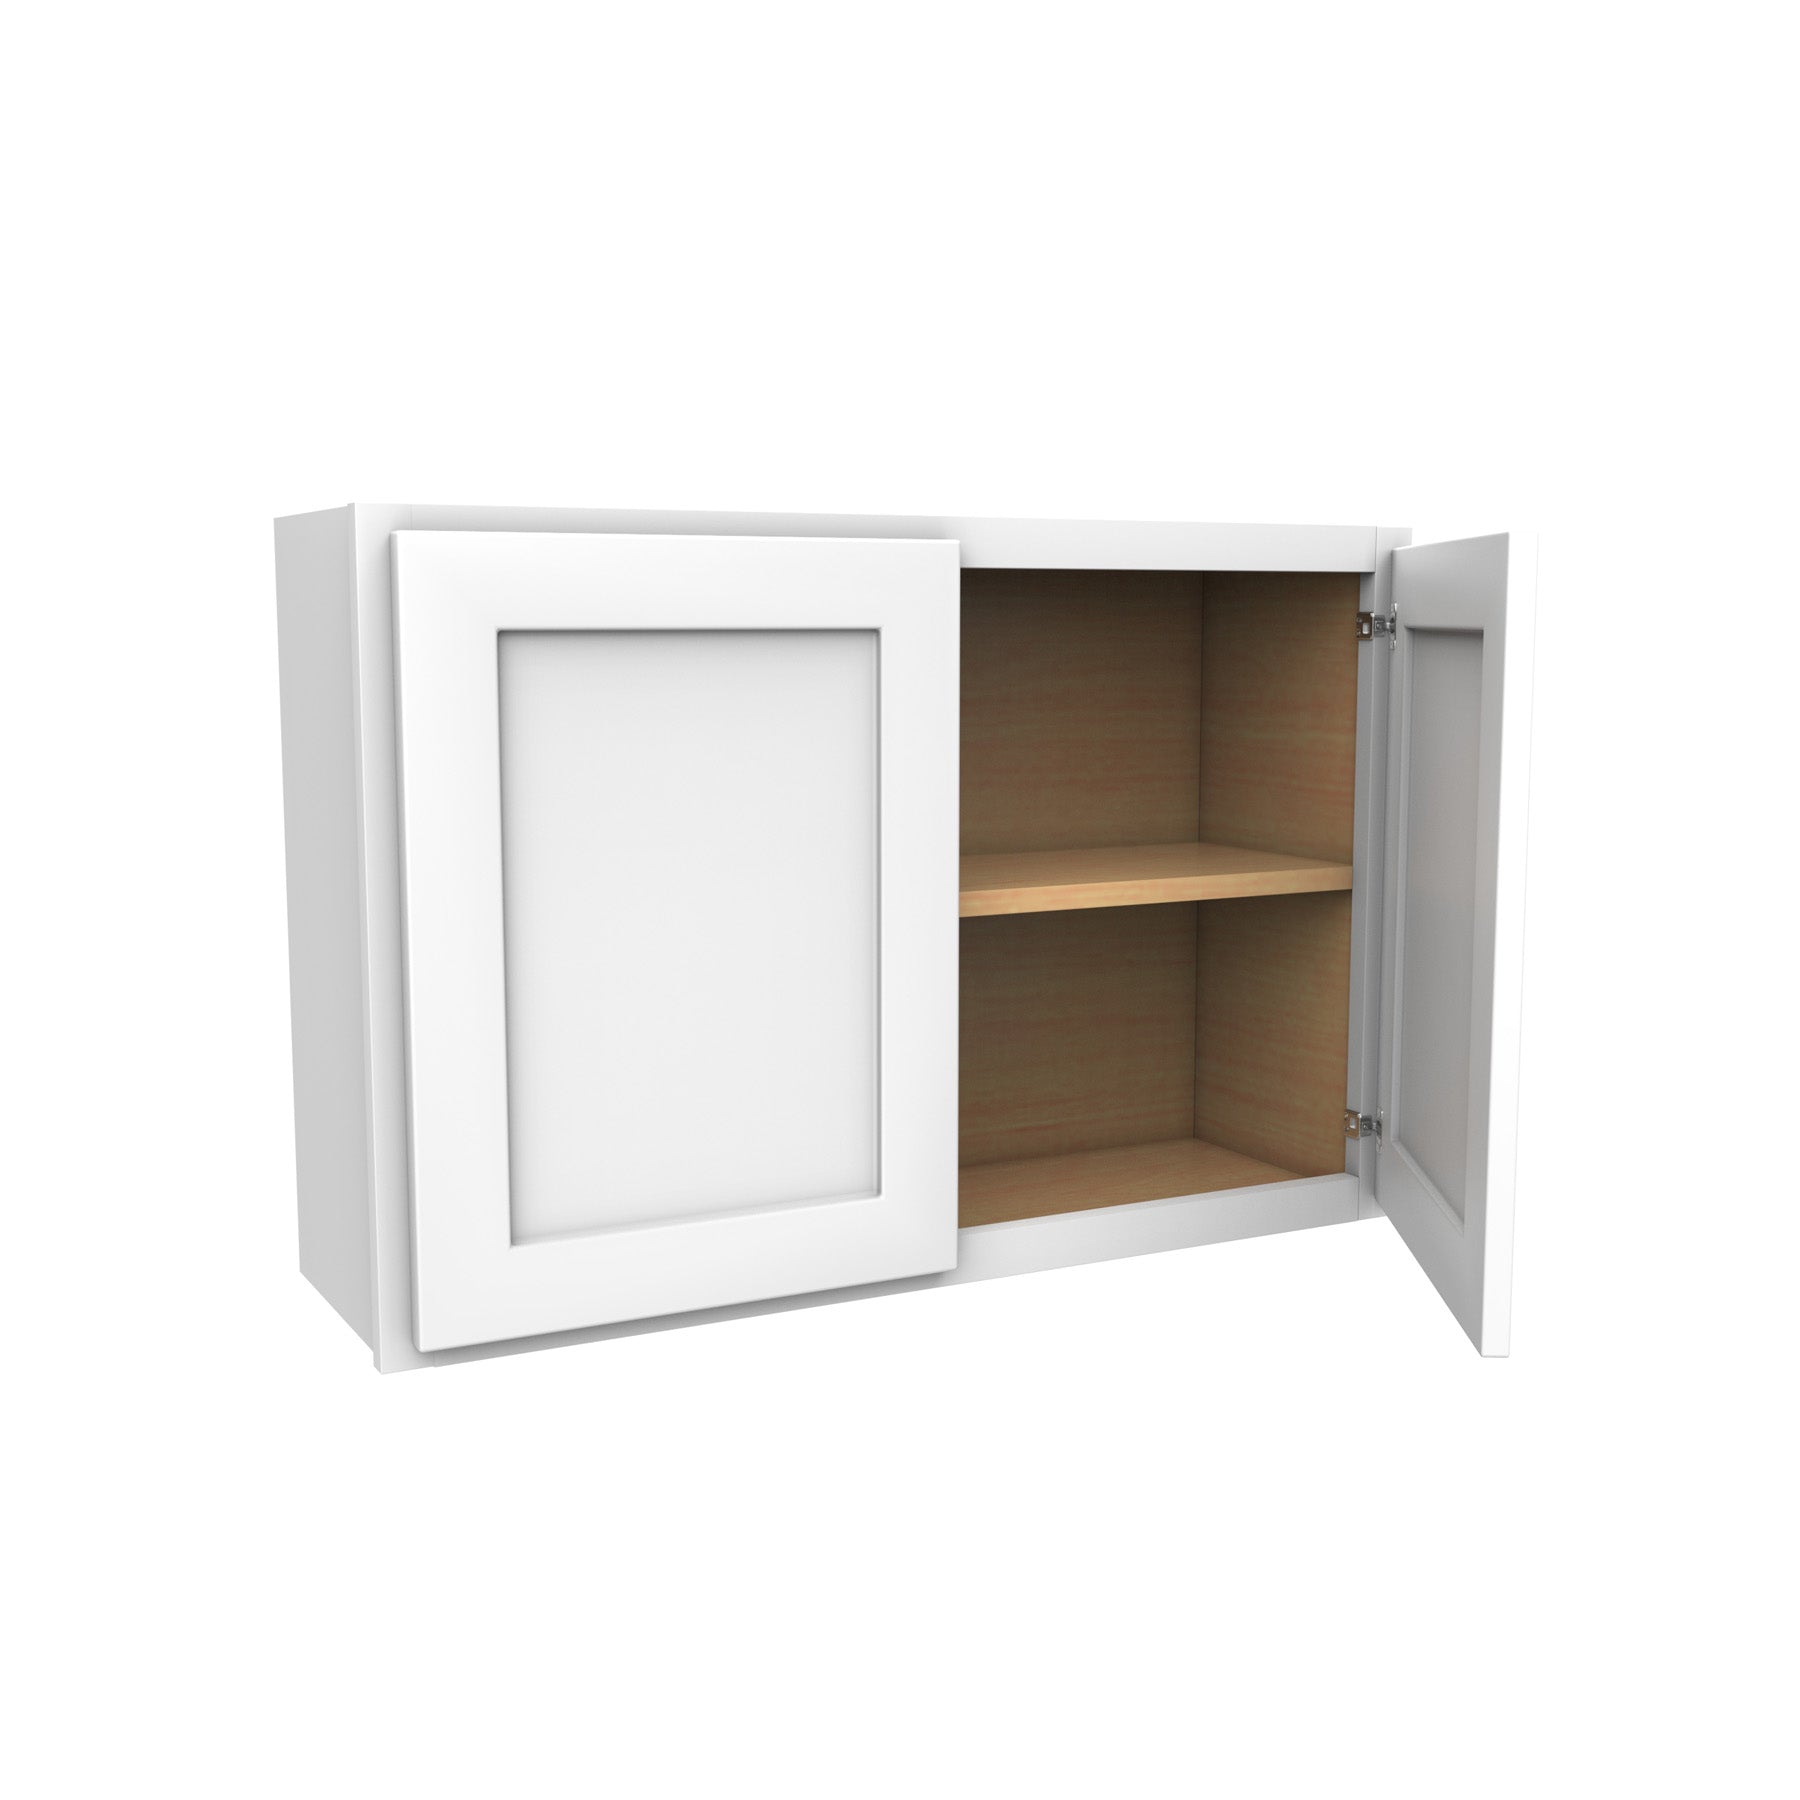 24 Inch High Double Door Wall Cabinet - Luxor White Shaker - Ready To Assemble, 36"W x 24"H x 12"D